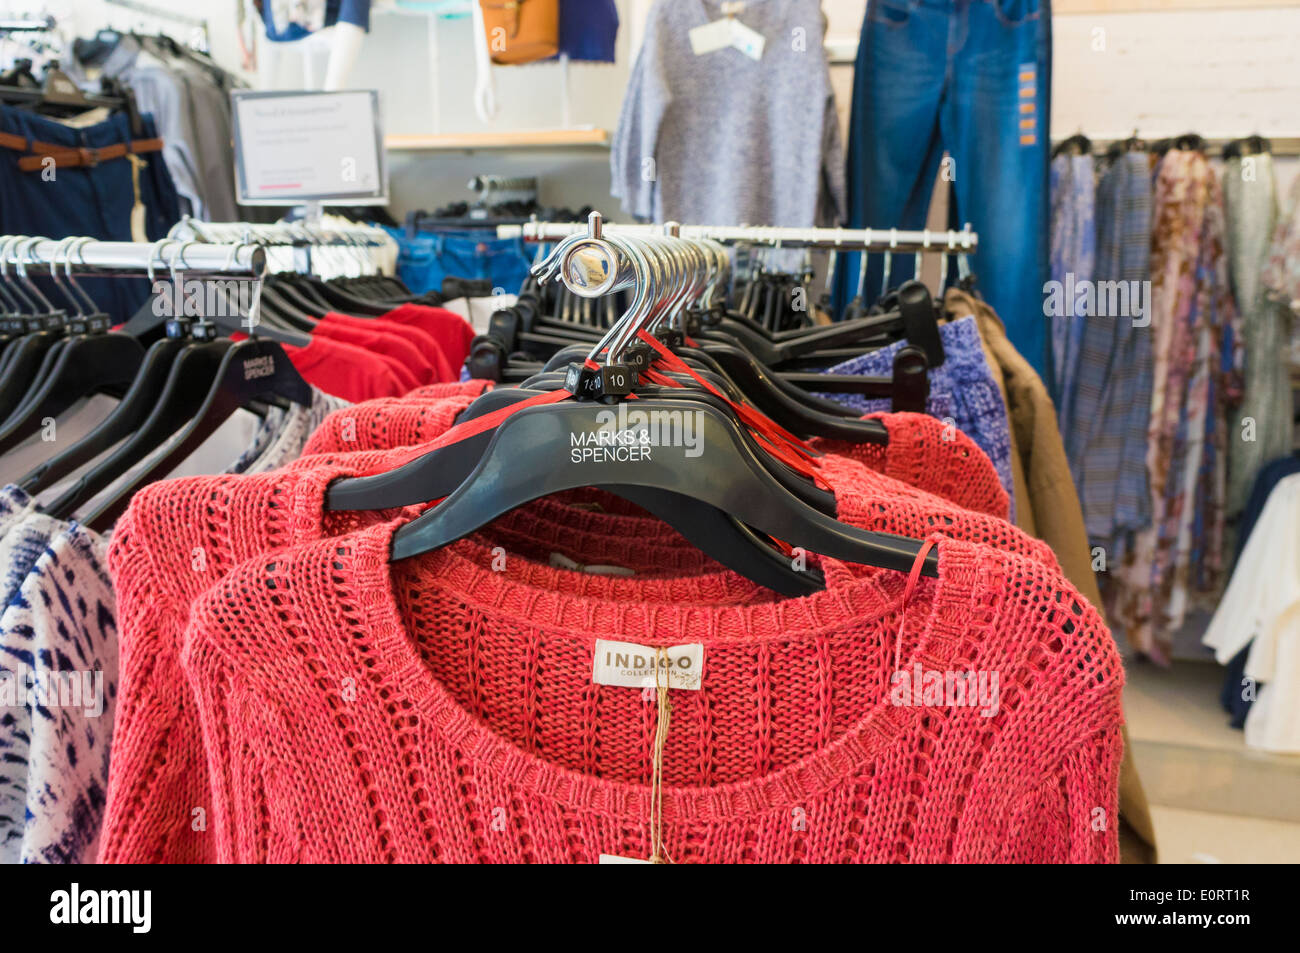 Marks and Spencer - M&S - clothing displays inside the store, England, UK Stock Photo